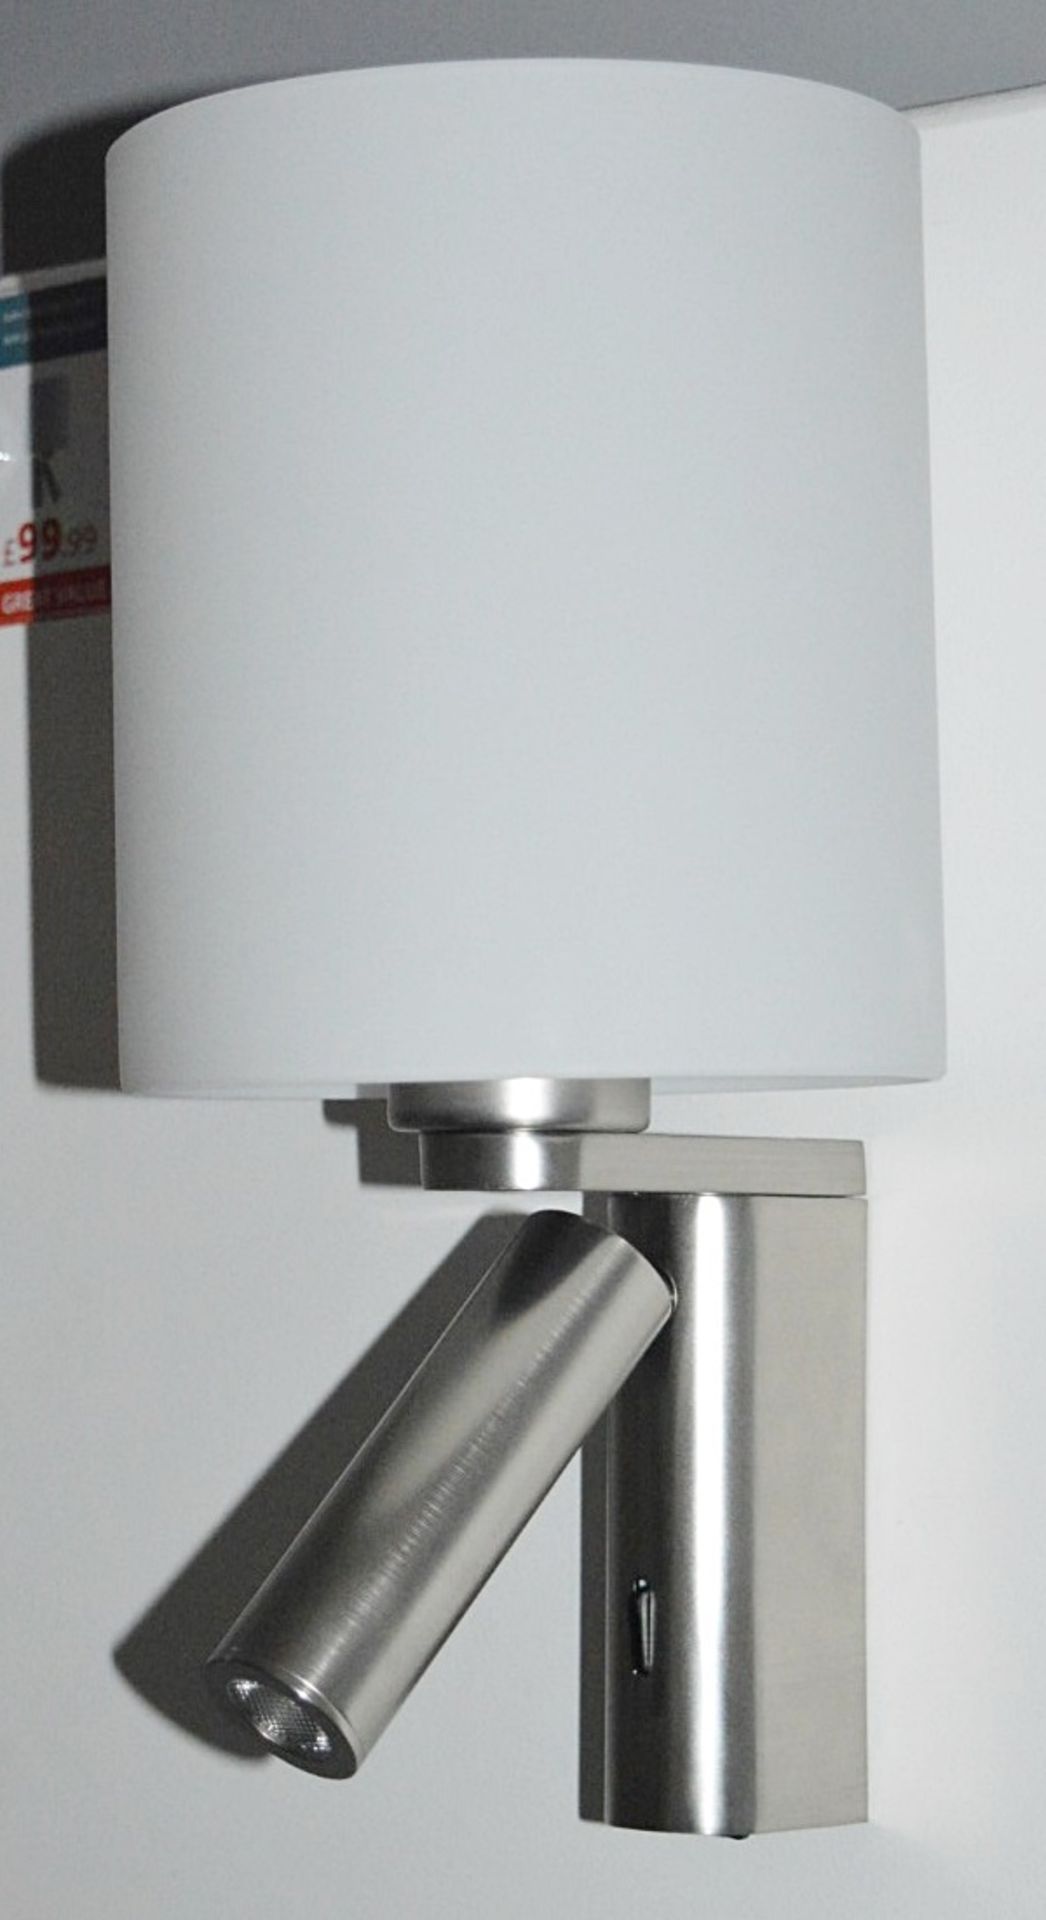 1 x Satin Silver Wall Light With LED Reading Light - Ex Display Stock - RRP £129.60 - Image 3 of 3